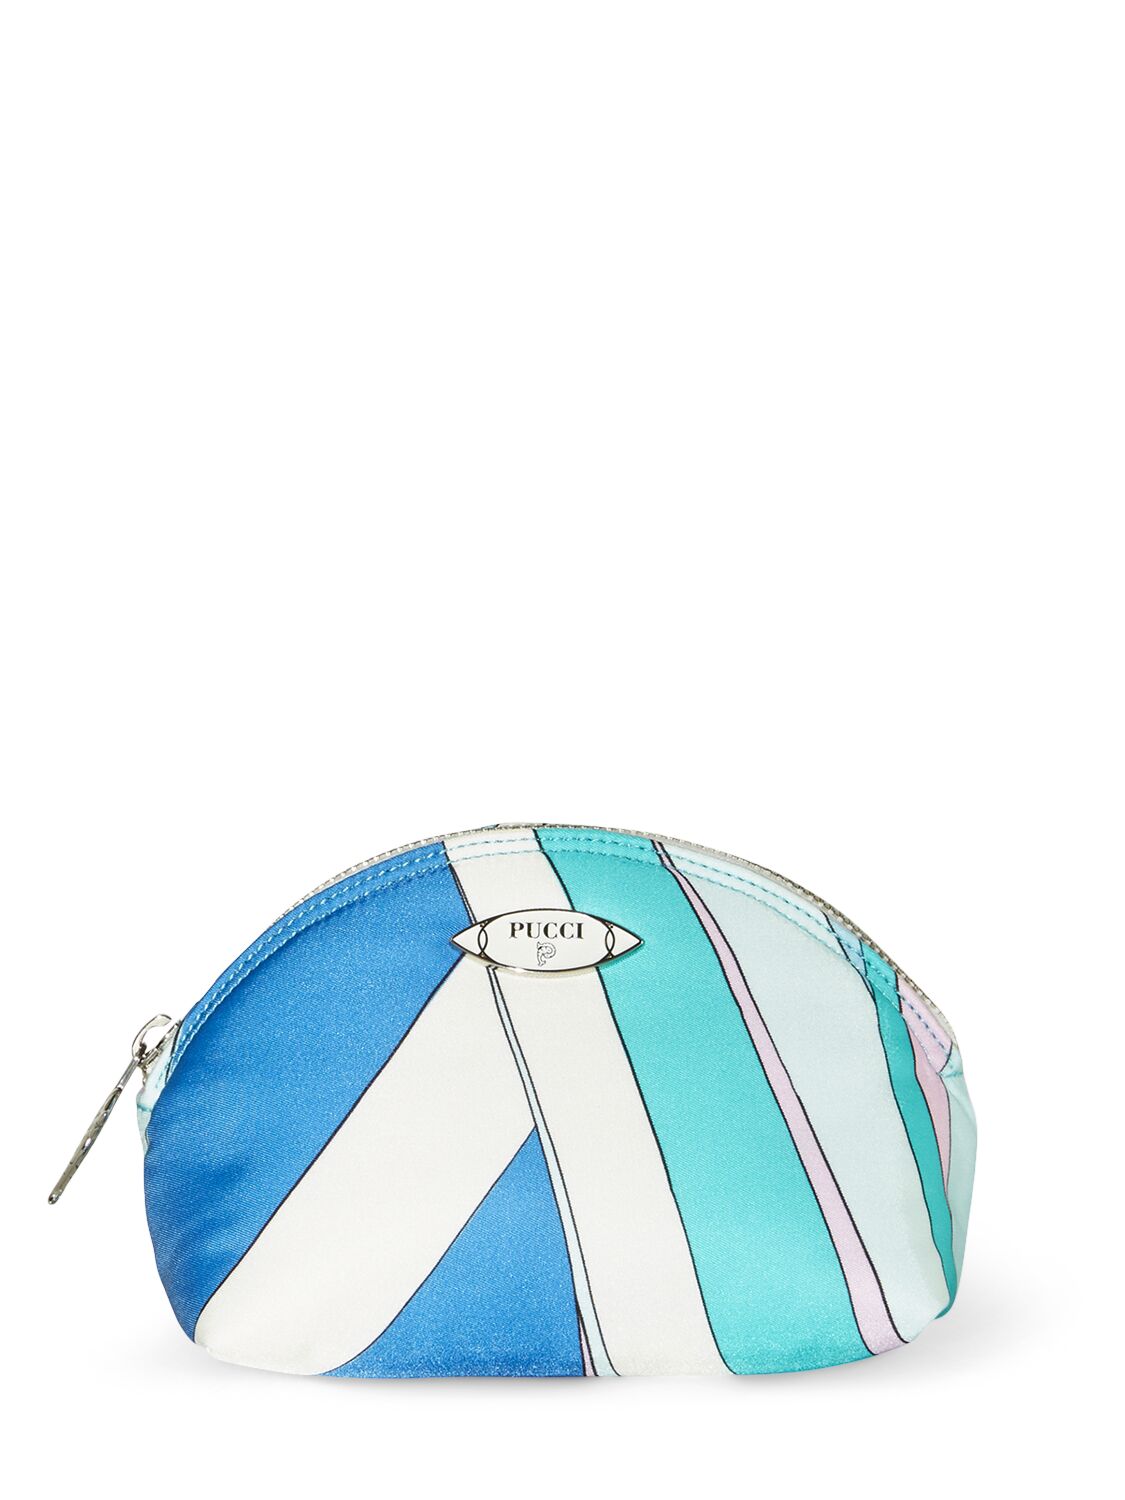 Pucci Small Printed Nylon Beauty Case In Light Blue,white